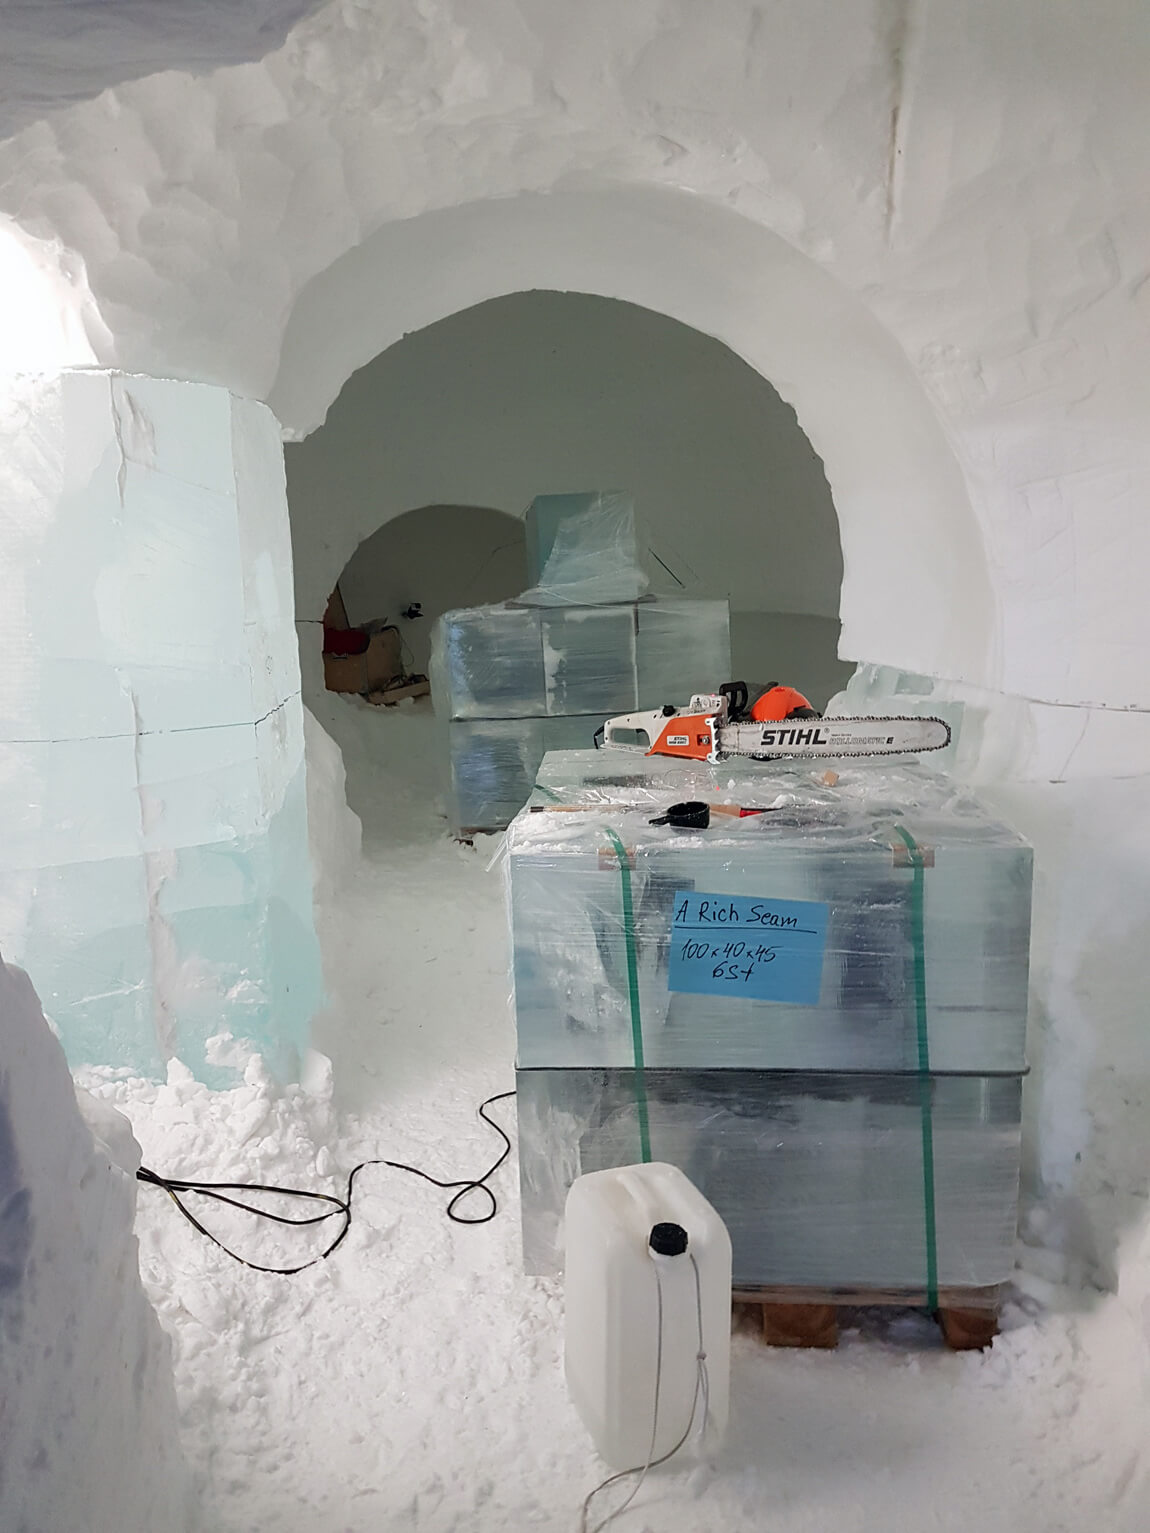 ICEHOTEL Sweden is built entirely of ice. The ice blocks have here been delivered, ready for carving.